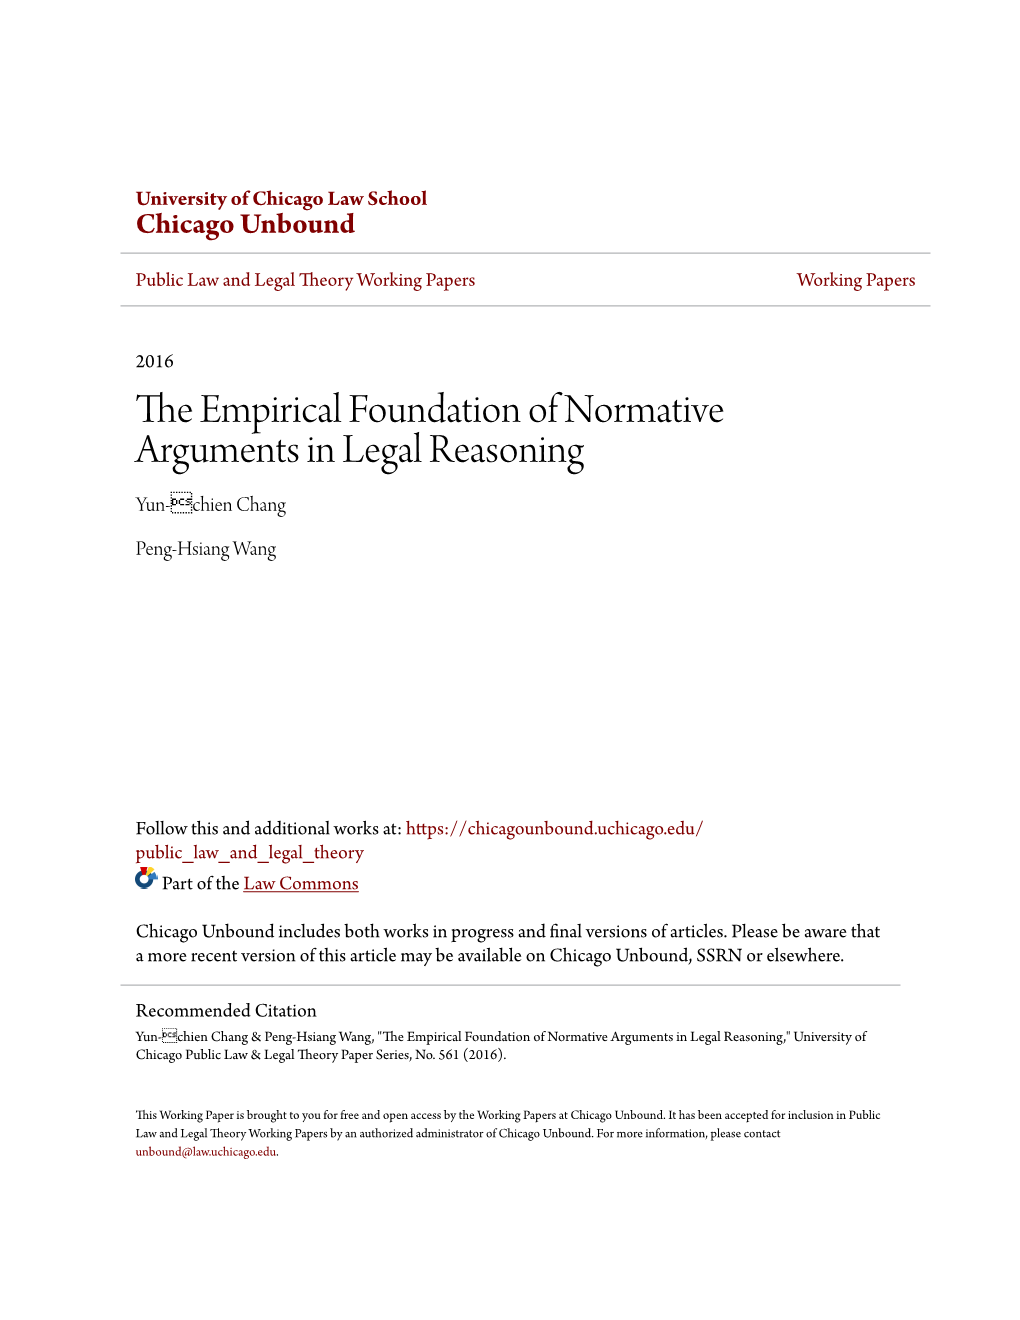 The Empirical Foundation of Normative Arguments in Legal Reasoning